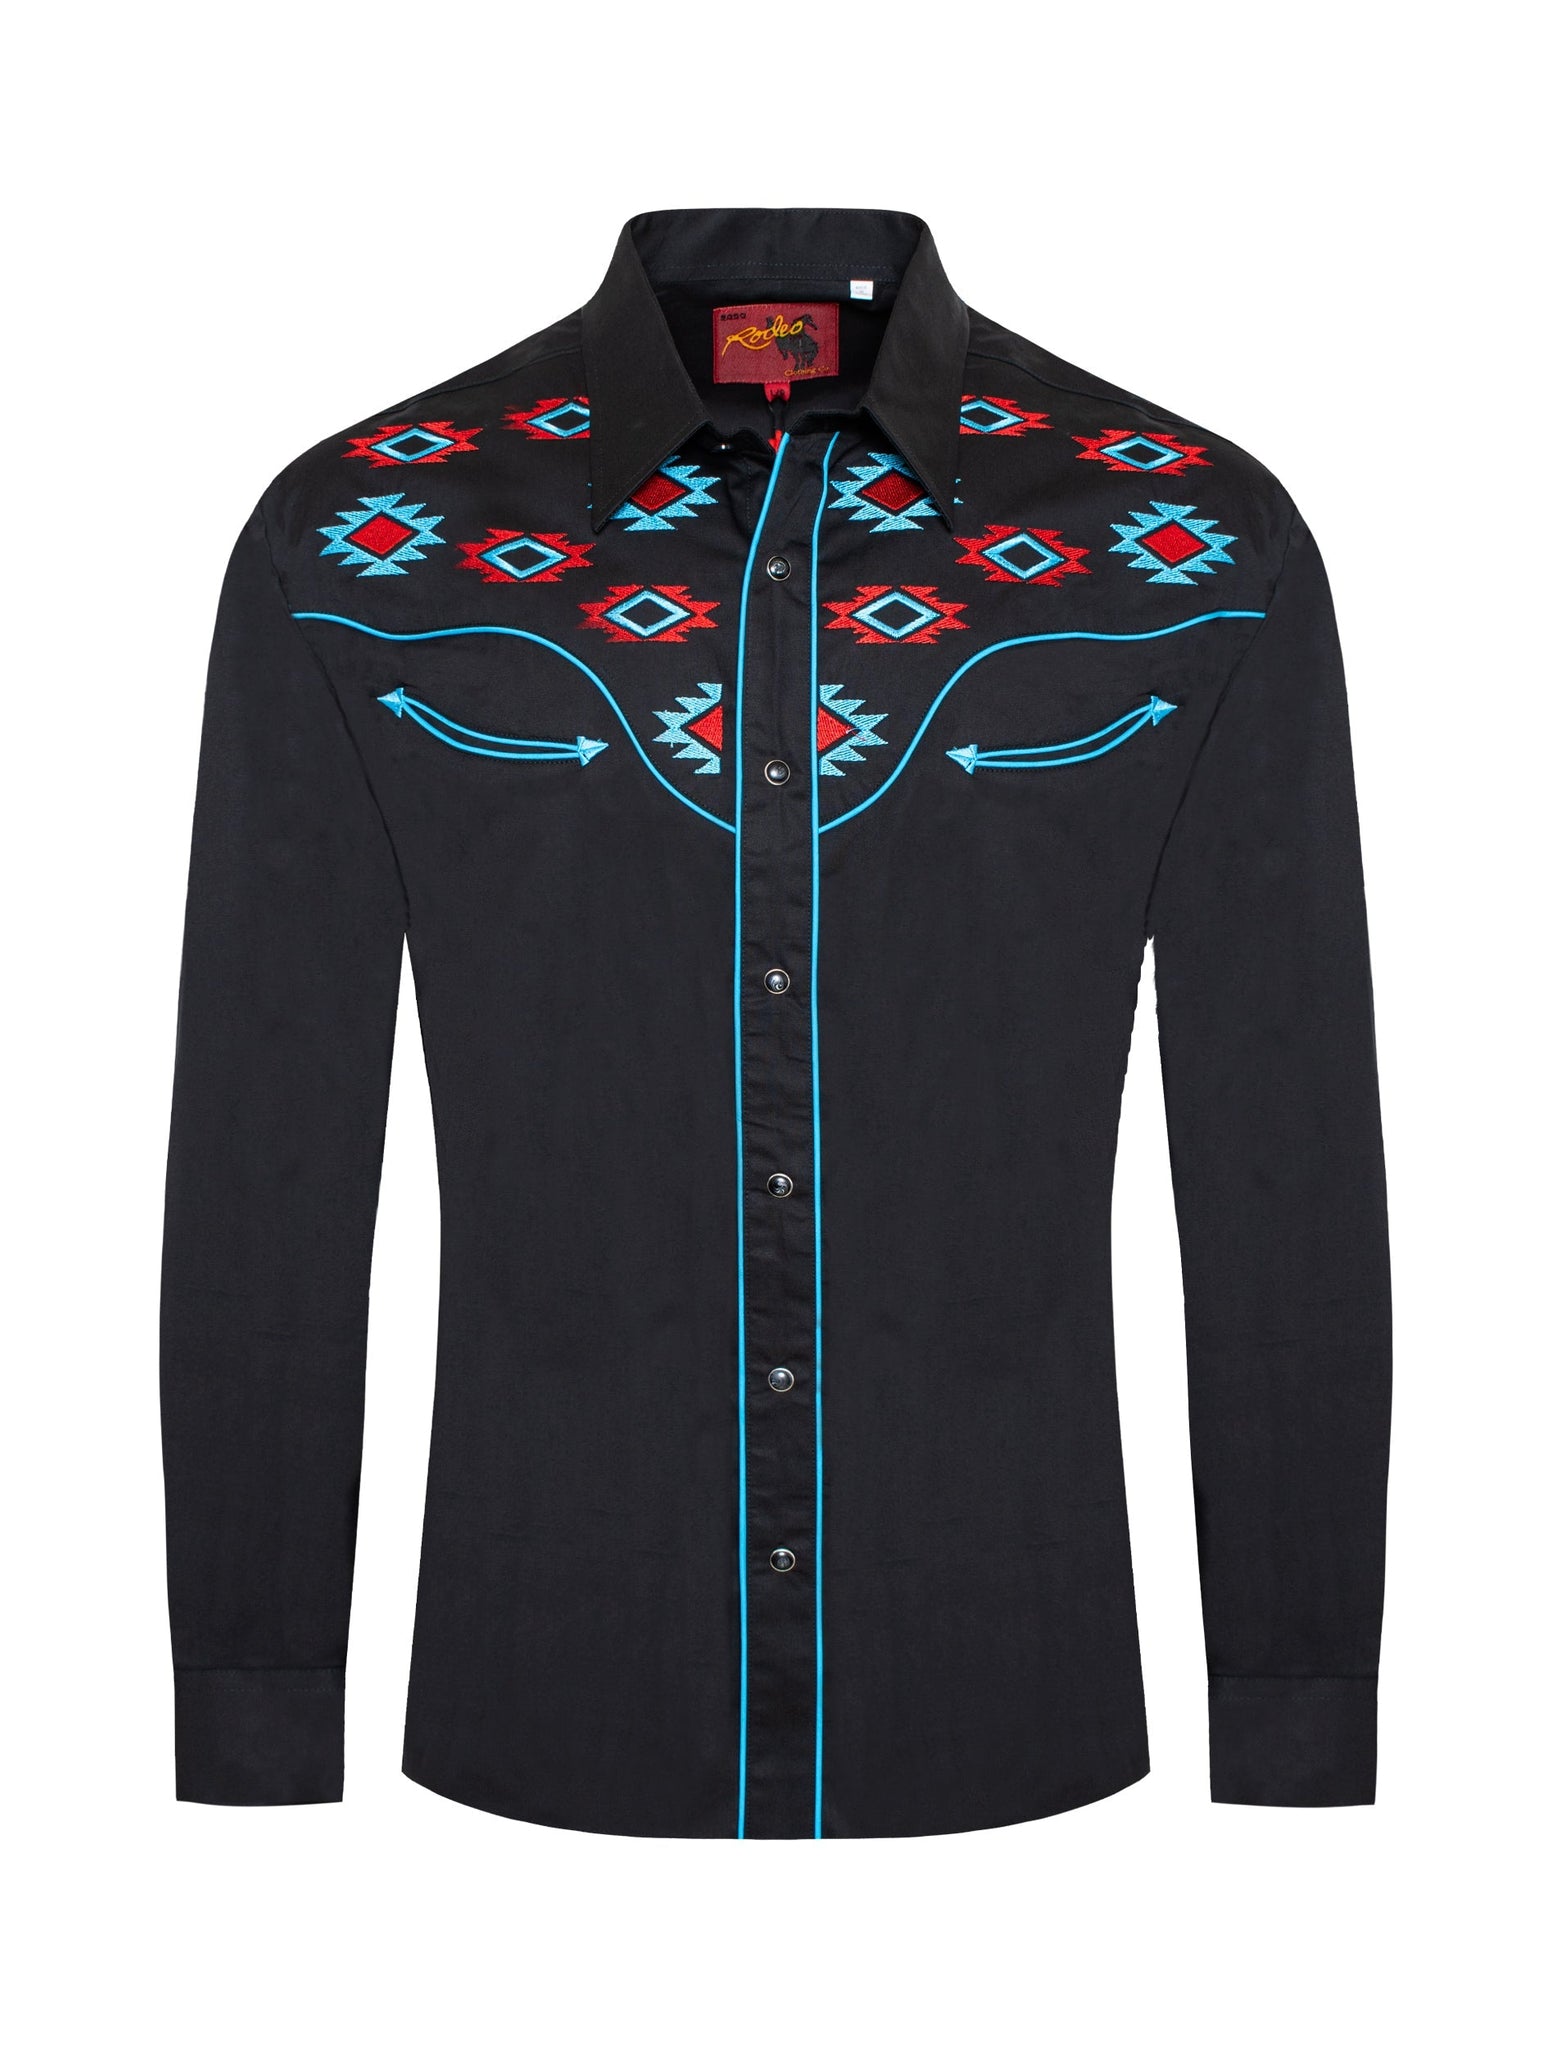 Men's Western Cowboy Embroidery Shirt -PS500L-572